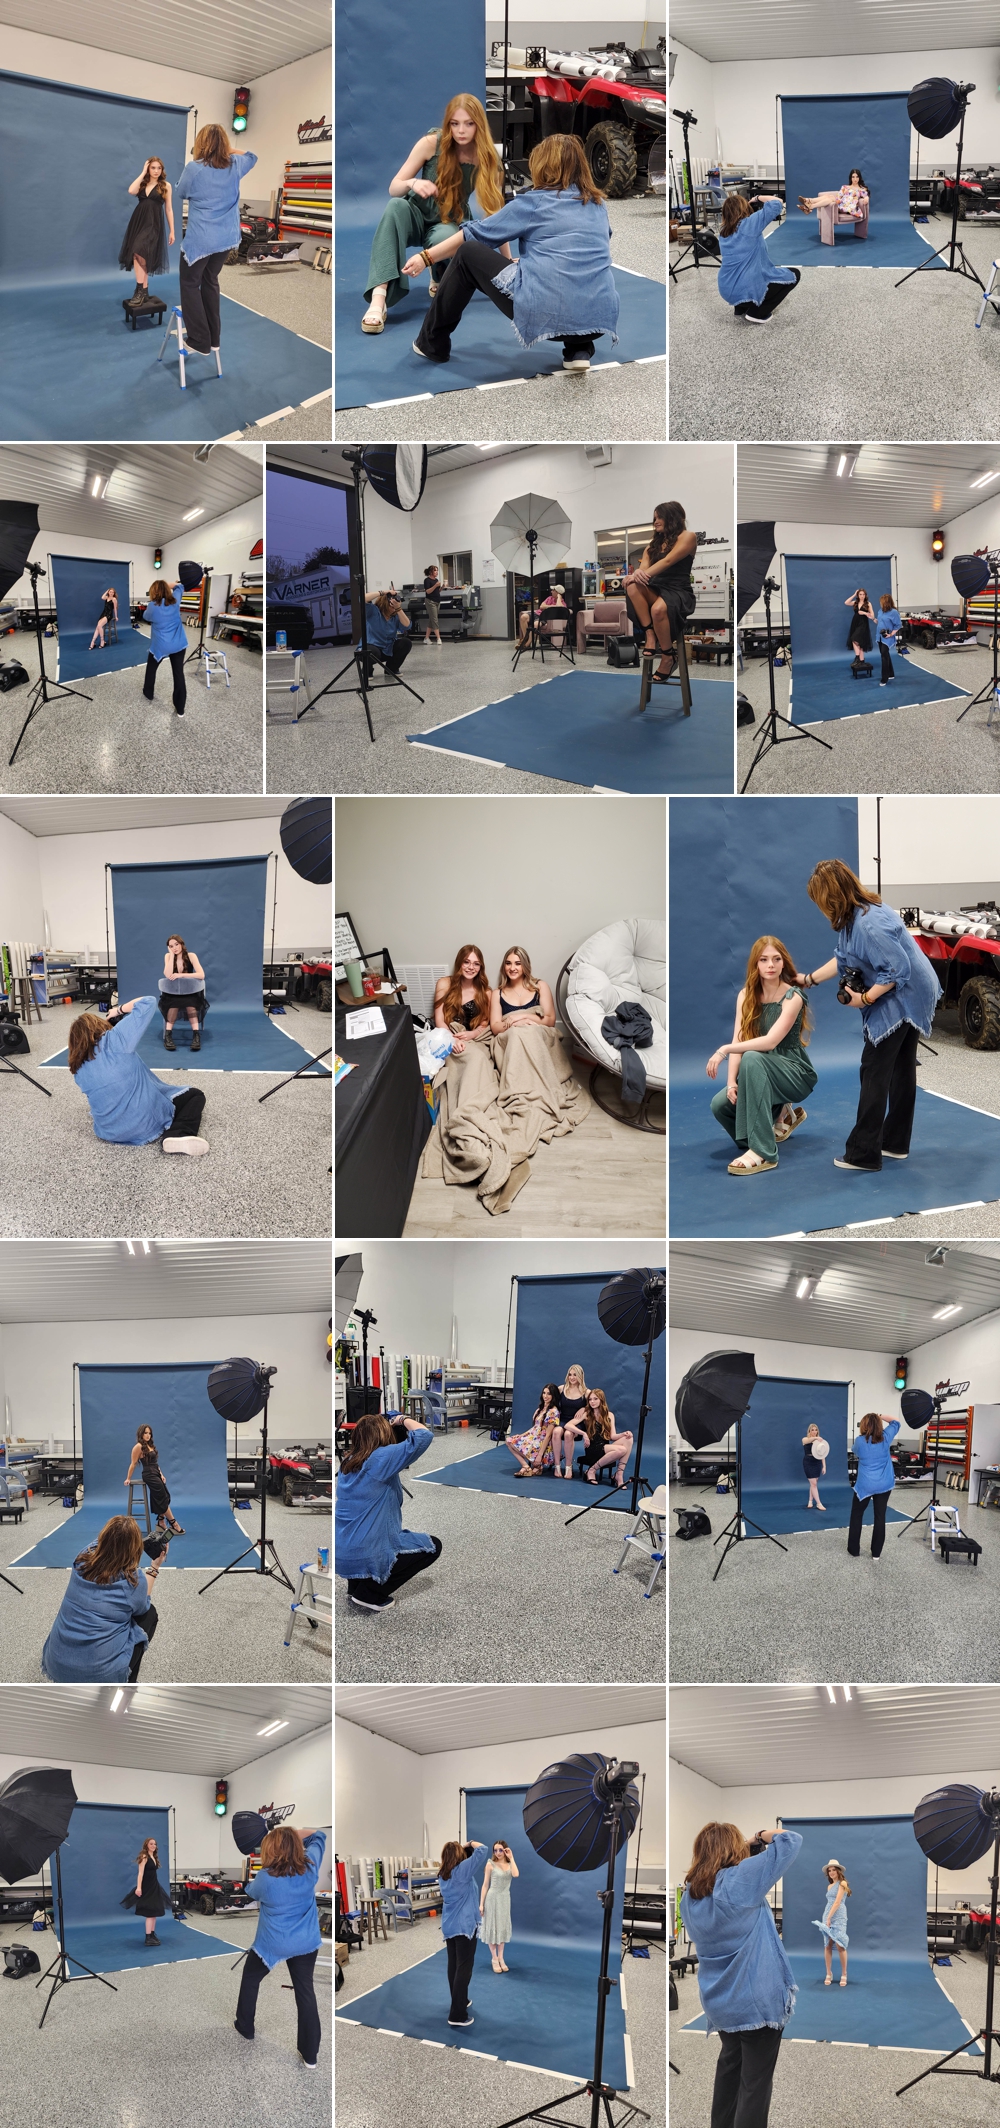 Behind-the-scenes photos of a high school senior photography team branded shoot.